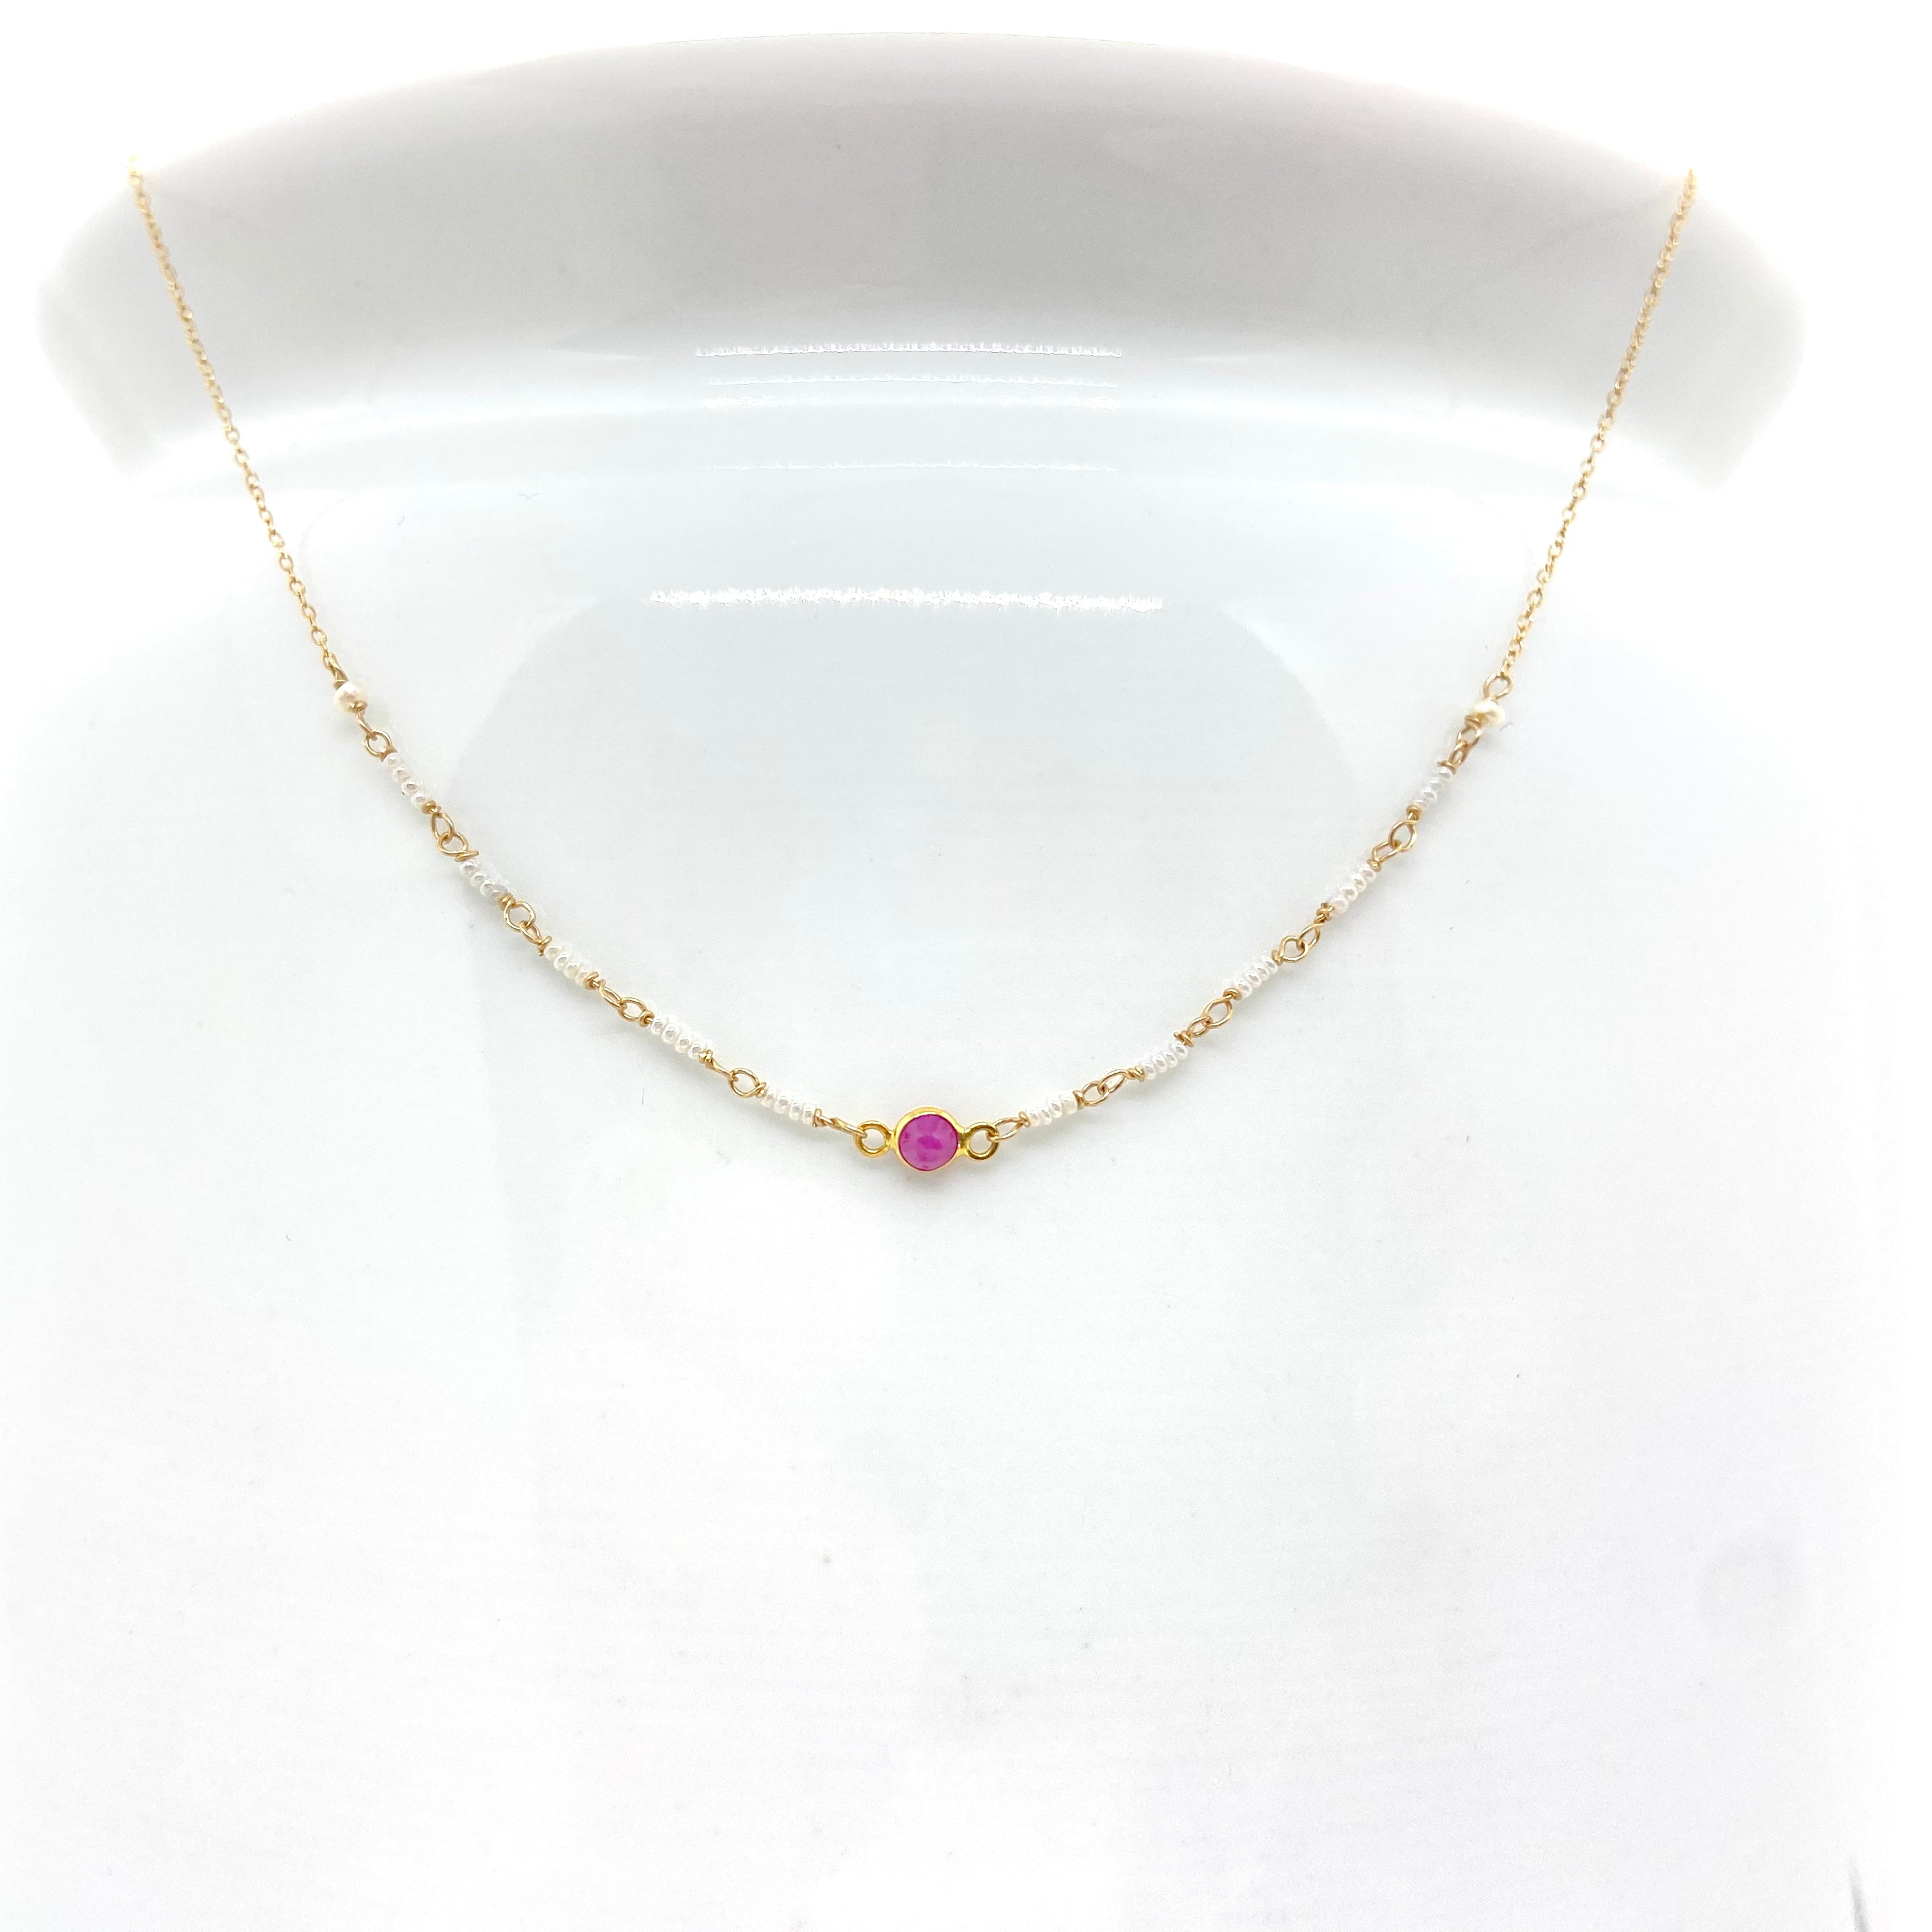 14k Gold Chain Necklace w/ 18k Gold Sapphire Pendant, Freshwater Pearls & Antique Italian Beads